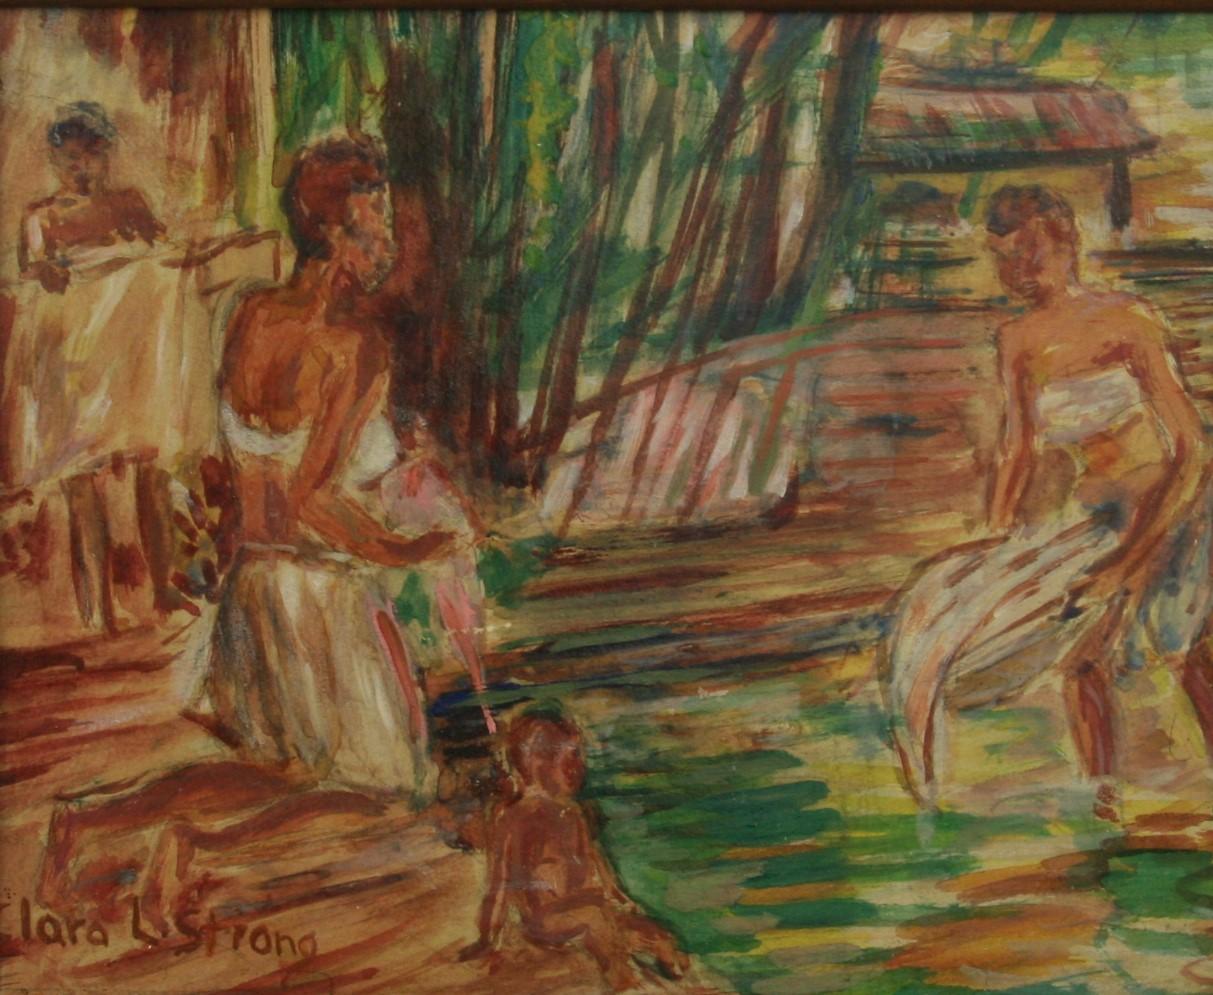 Antique Scandinavian Bathers at the Stream Figurative Landscape - Painting by Clara L. Strong